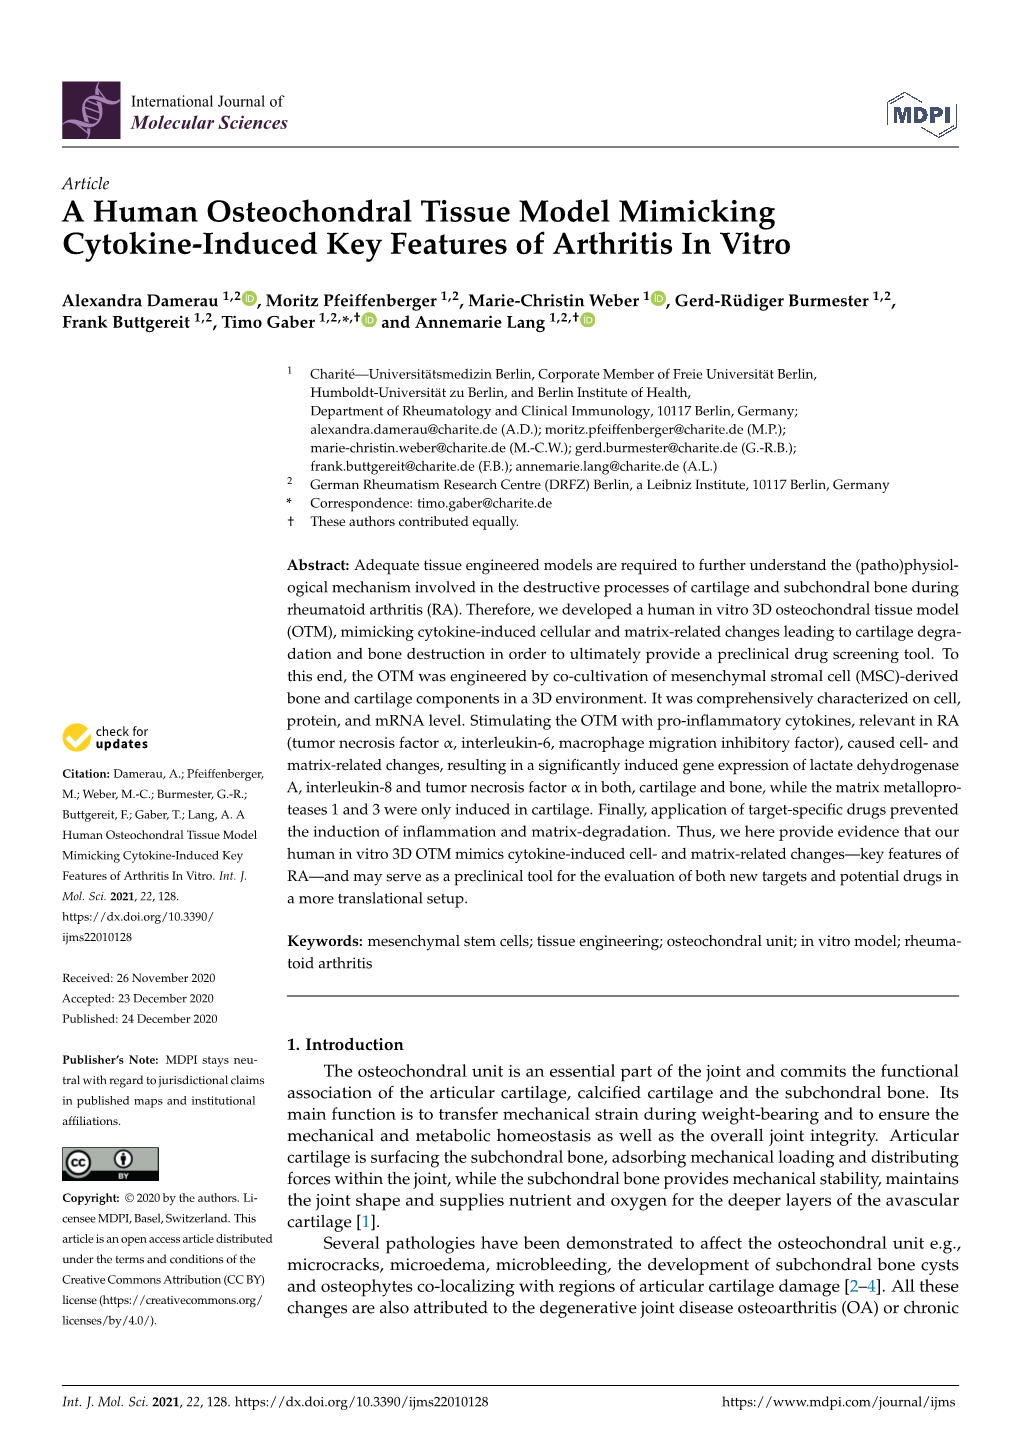 A Human Osteochondral Tissue Model Mimicking Cytokine-Induced Key Features of Arthritis in Vitro